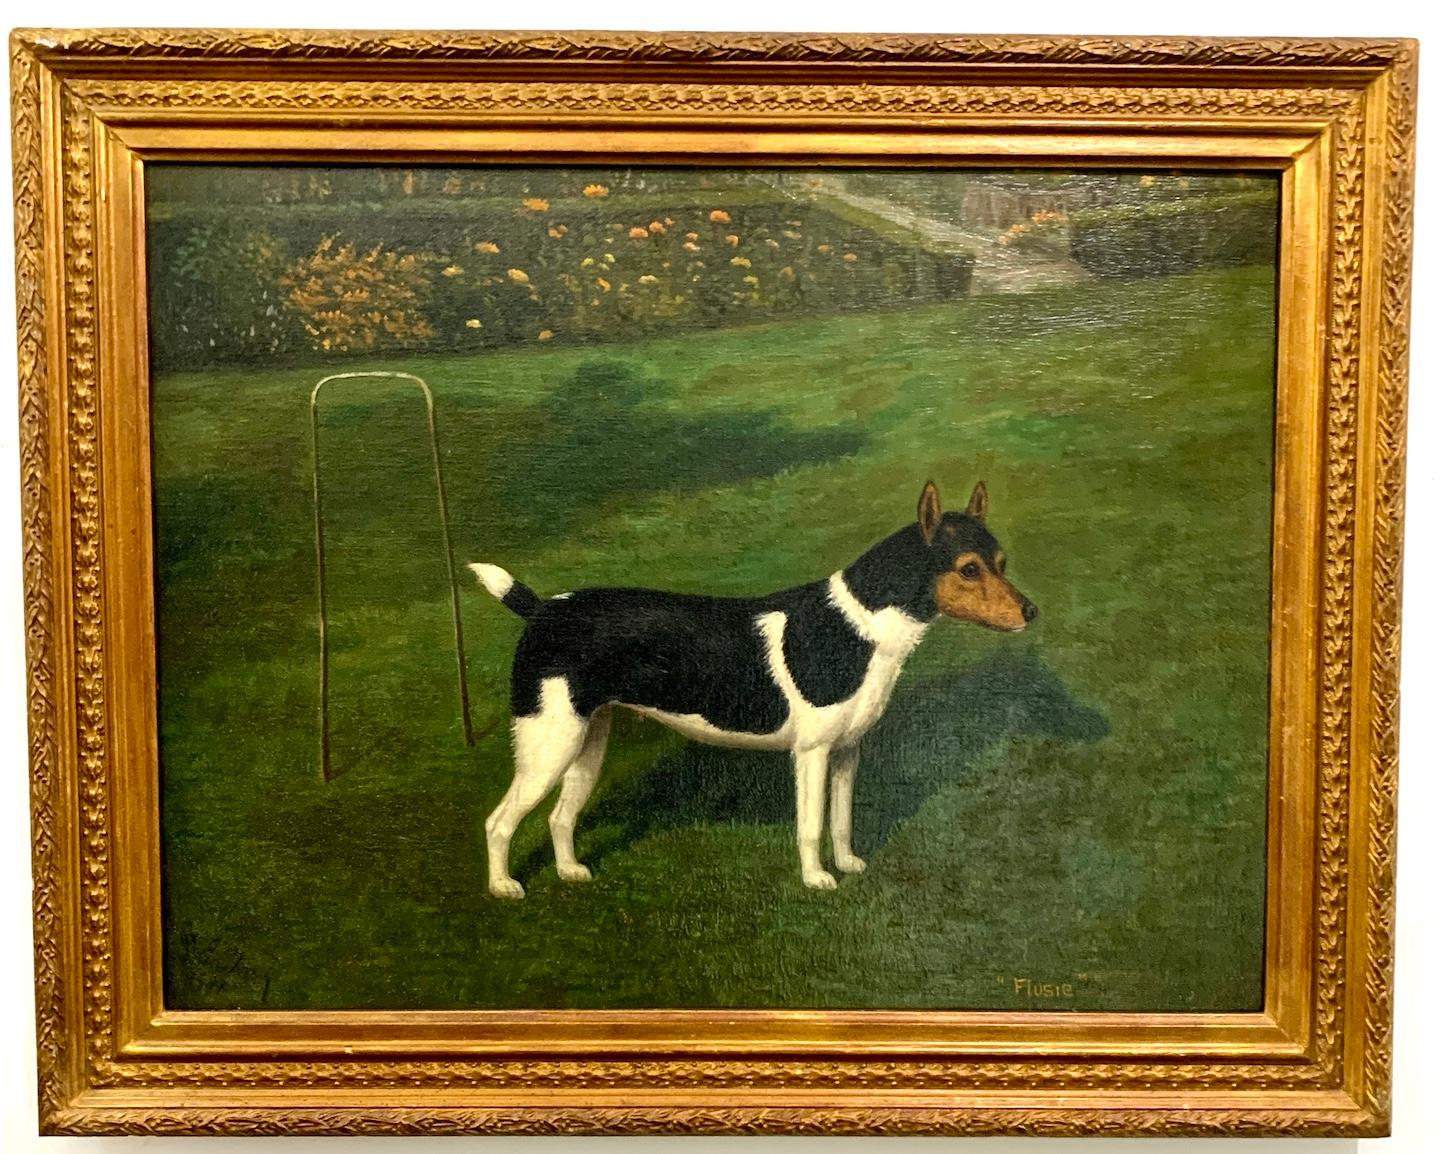 William Albert Clark Landscape Painting - English Portrait of a Jack Russell Terrier dog in a landscape, 'Flusie'